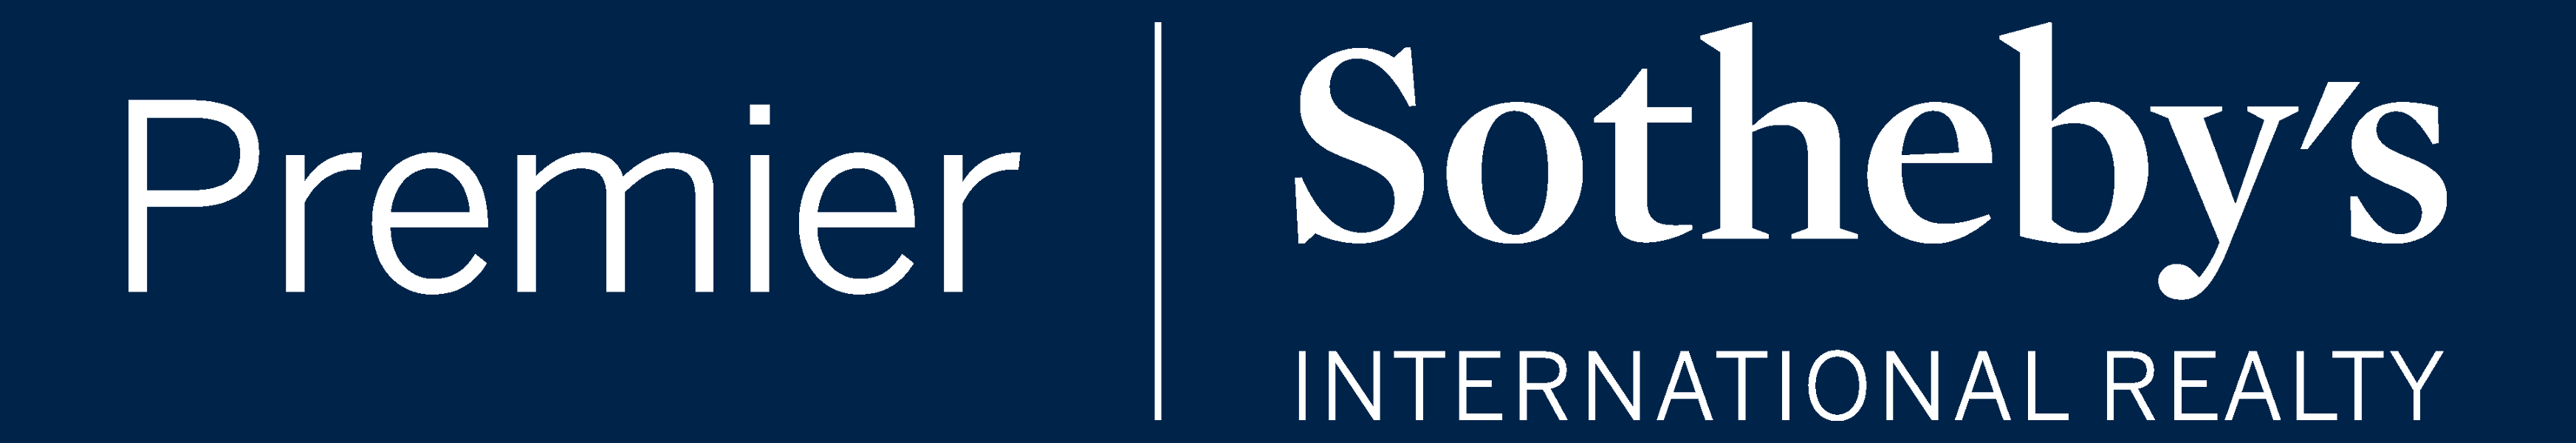 Premier Sotheby's Int. Realty